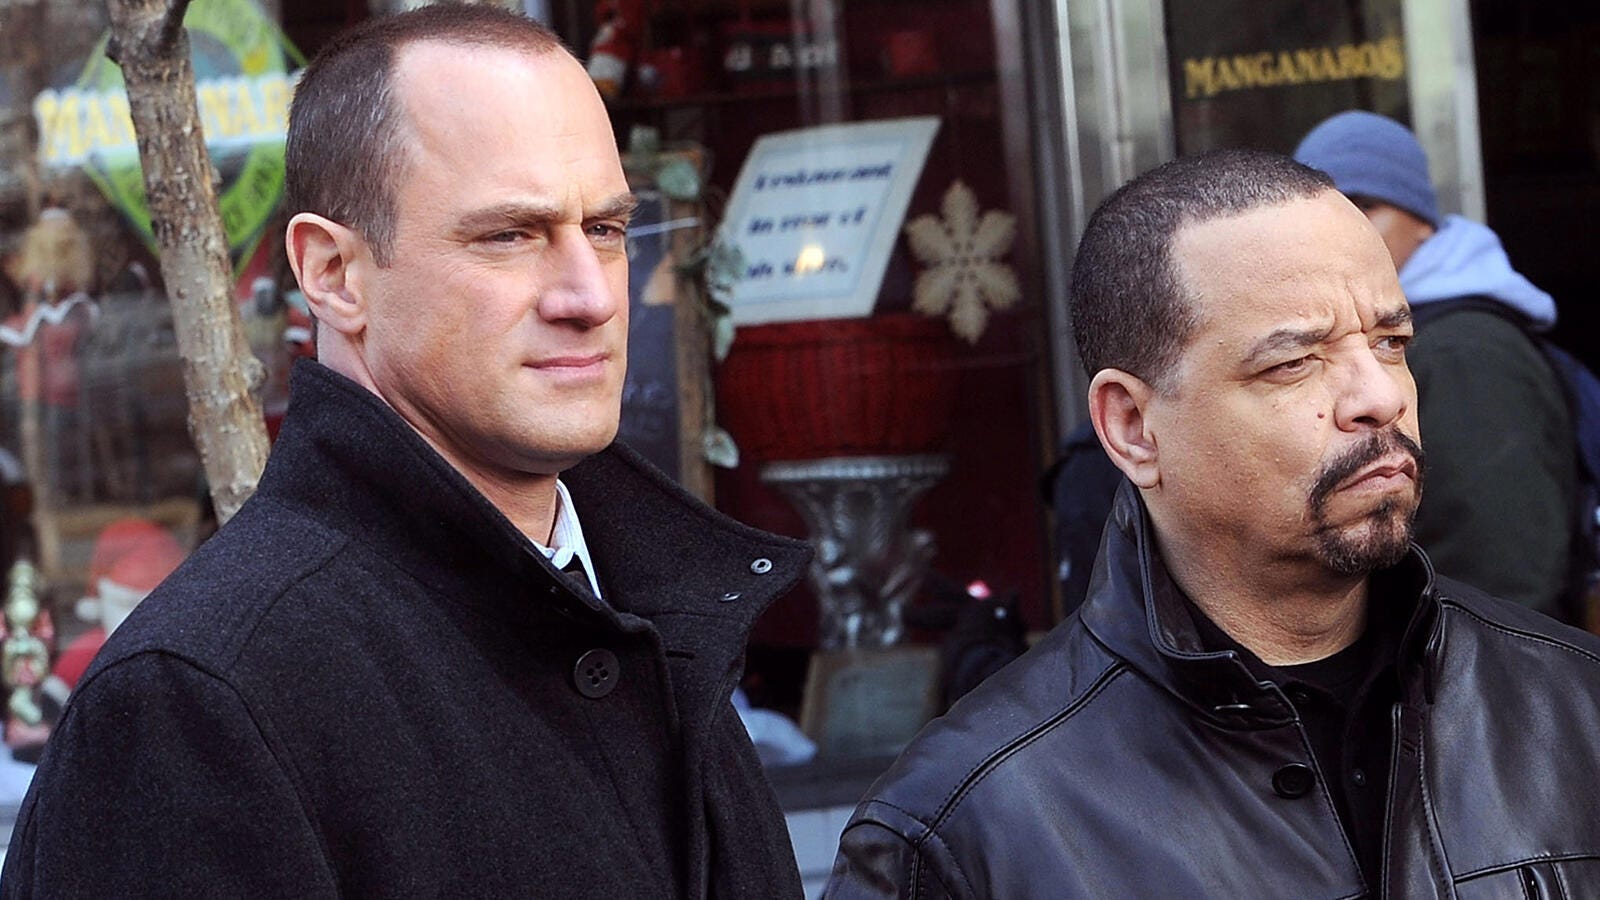 Christopher Meloni and Ice-T filming on location for Law & Order SVU